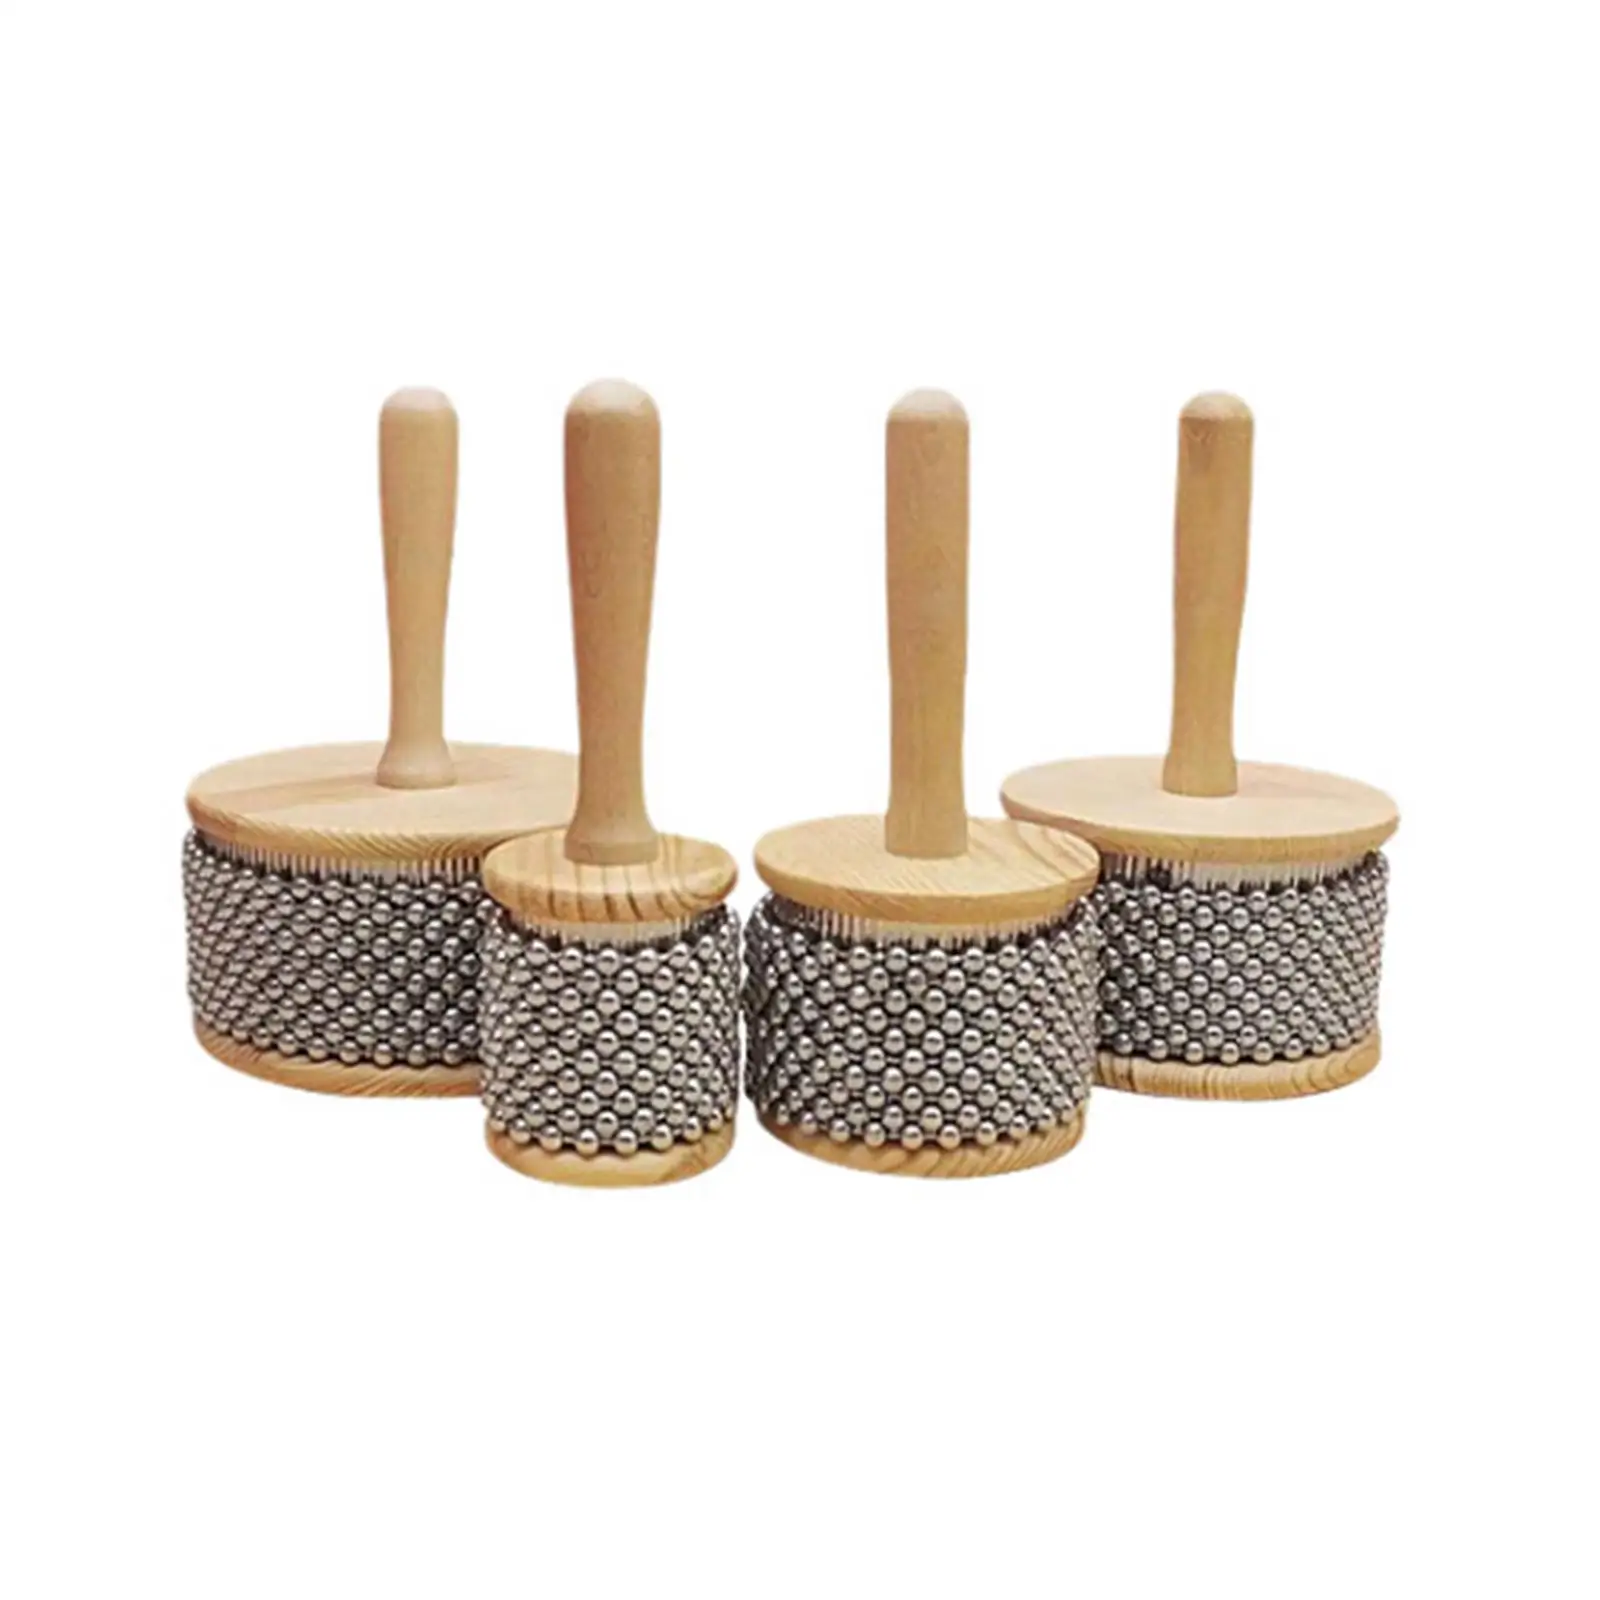 Wooden Hand Shaker Fun Percussion Instrument Instrument W/ Metal Bead